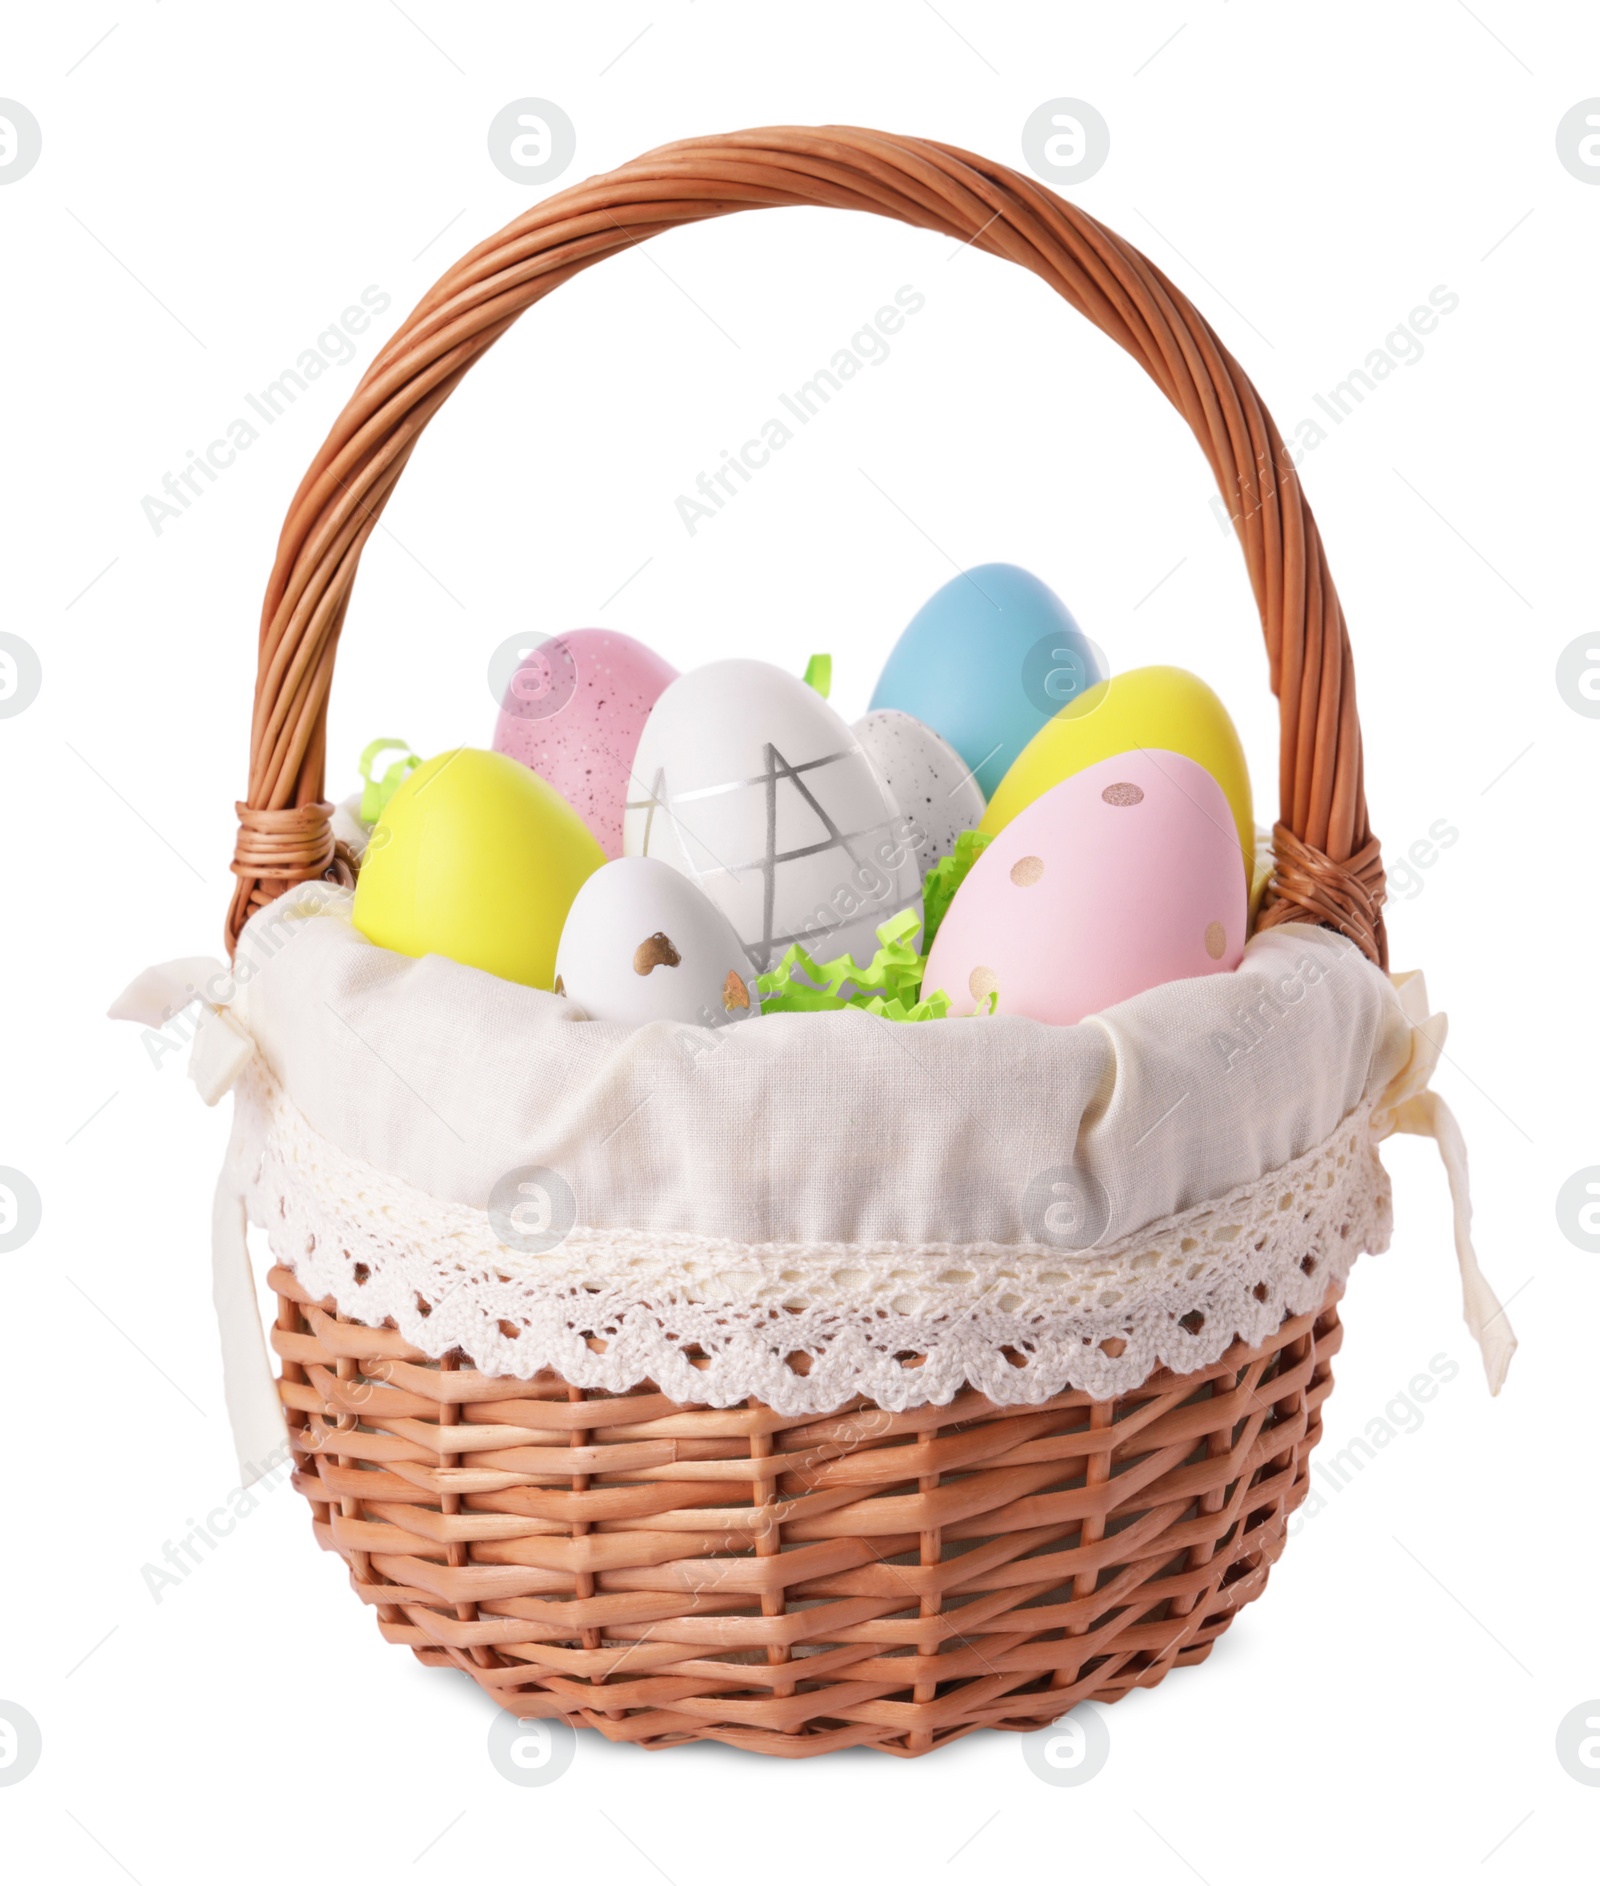 Photo of Wicker basket with beautifully painted Easter eggs isolated on white